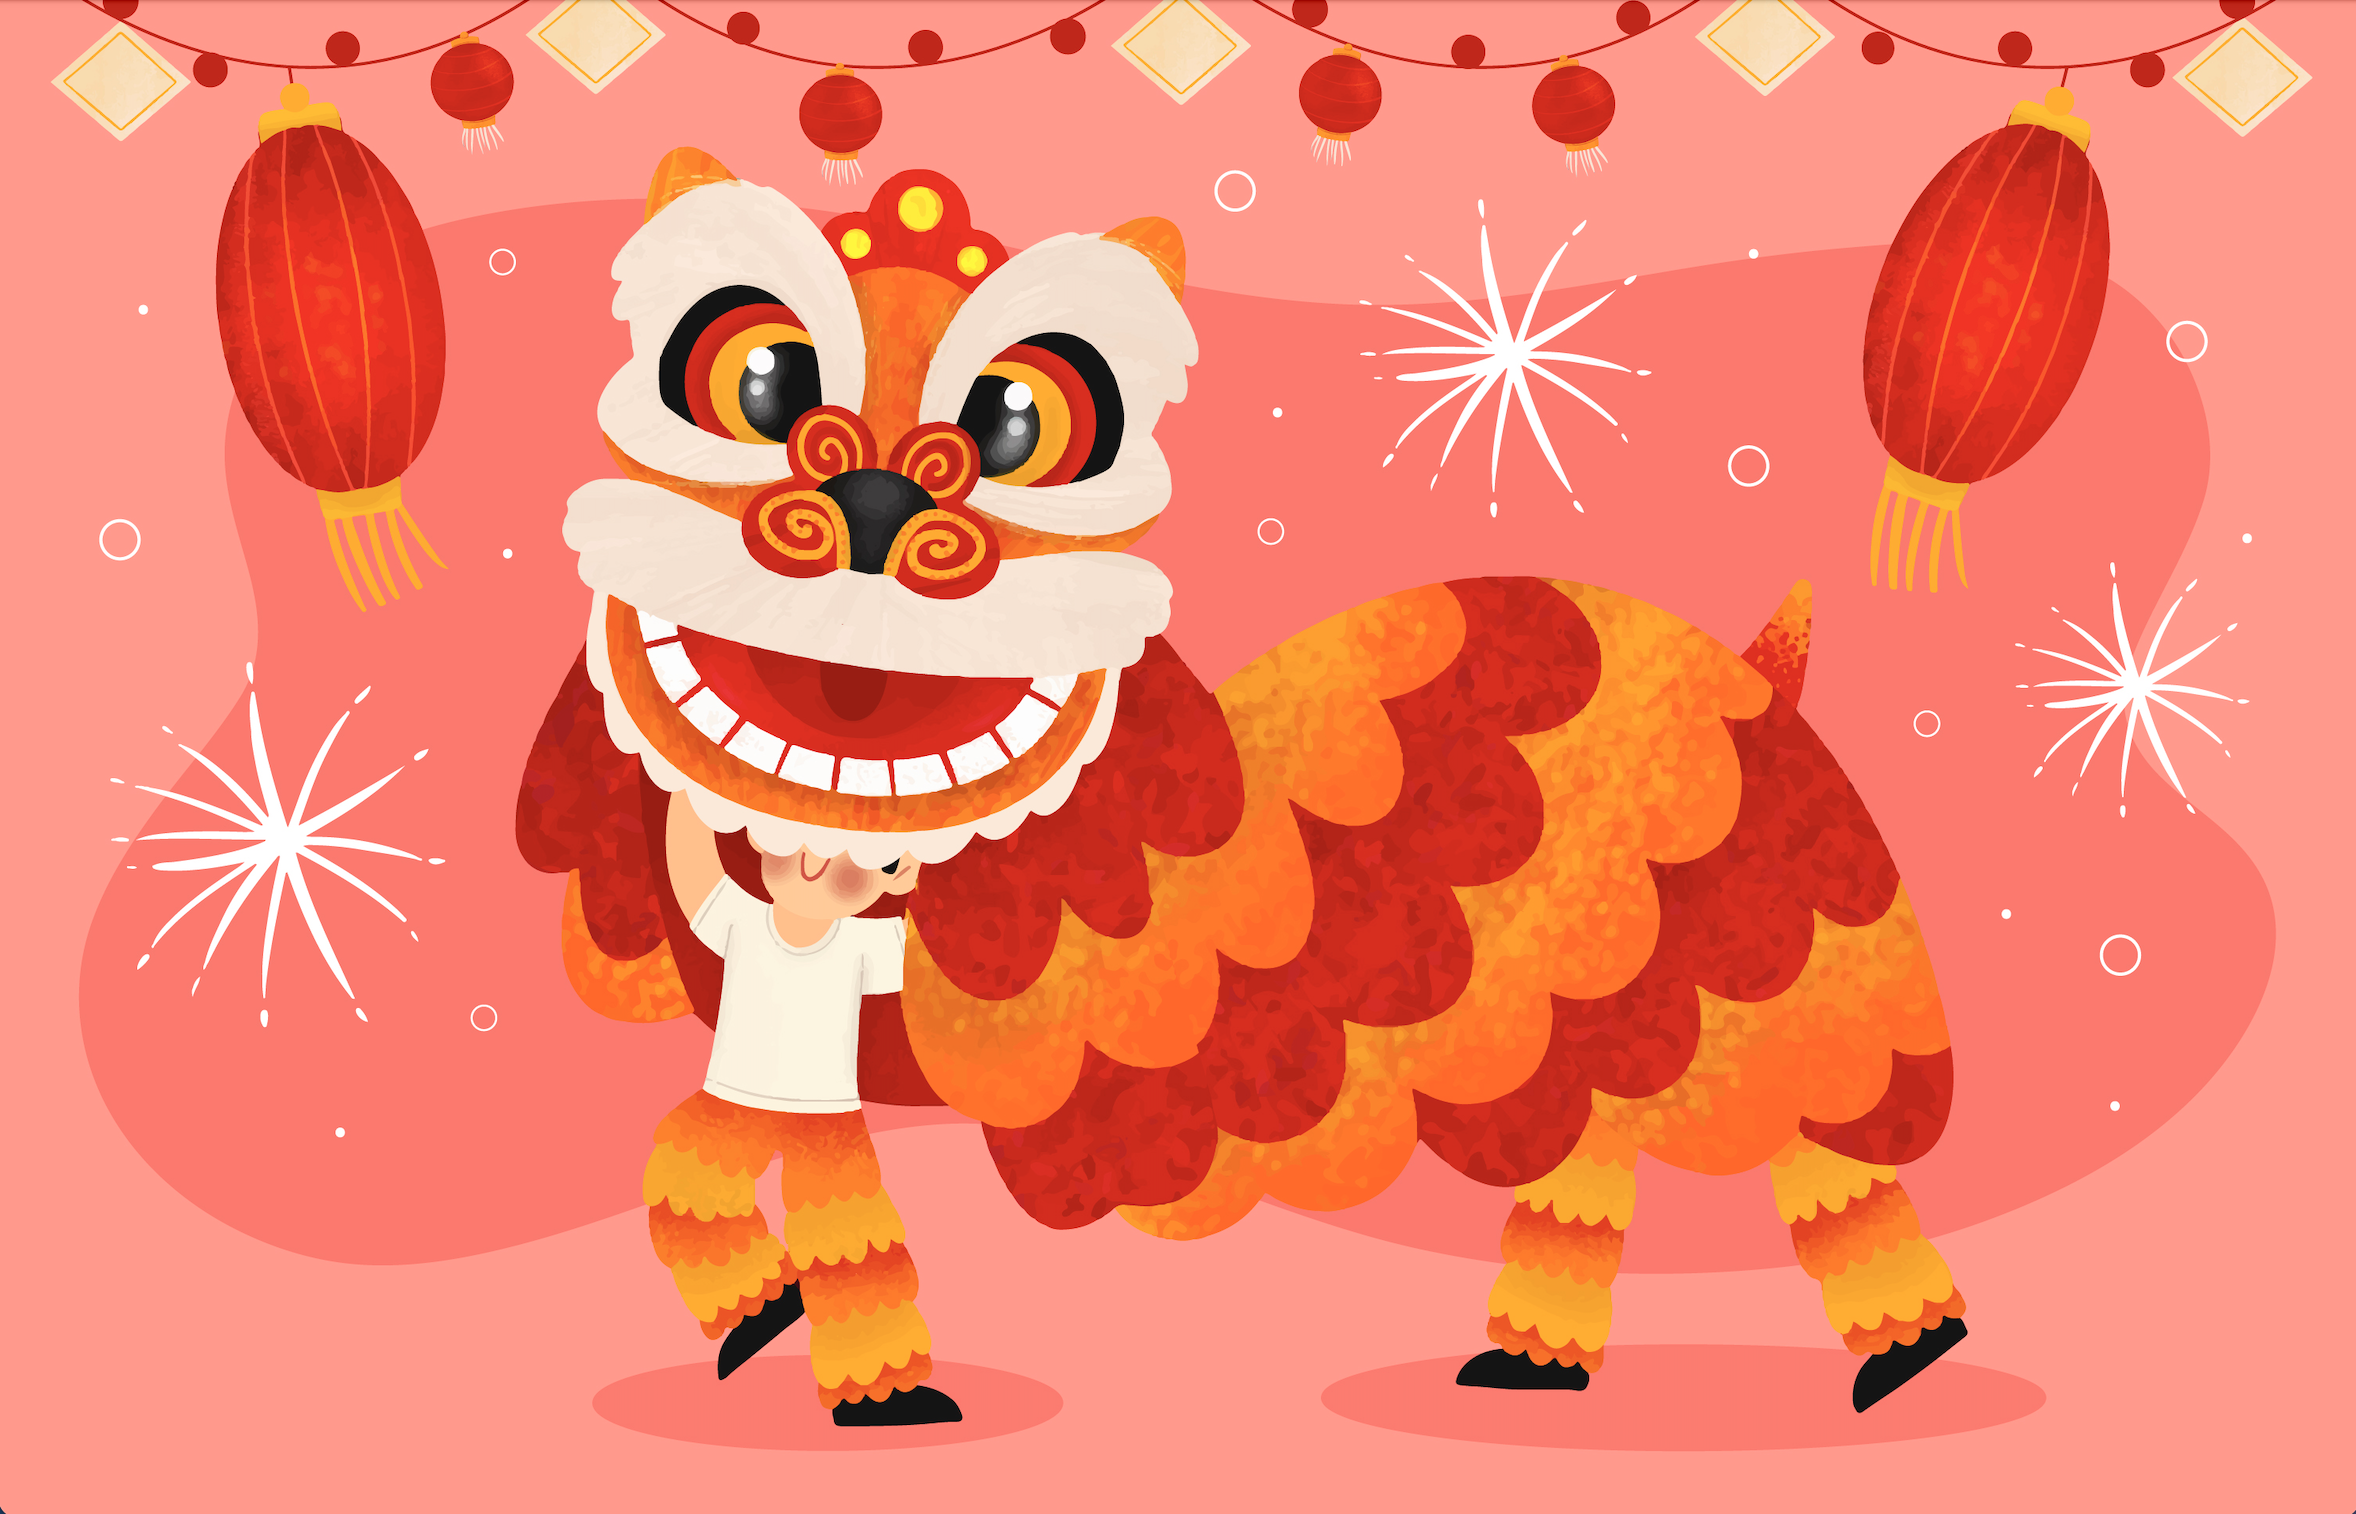 Chinese New Year lion dance